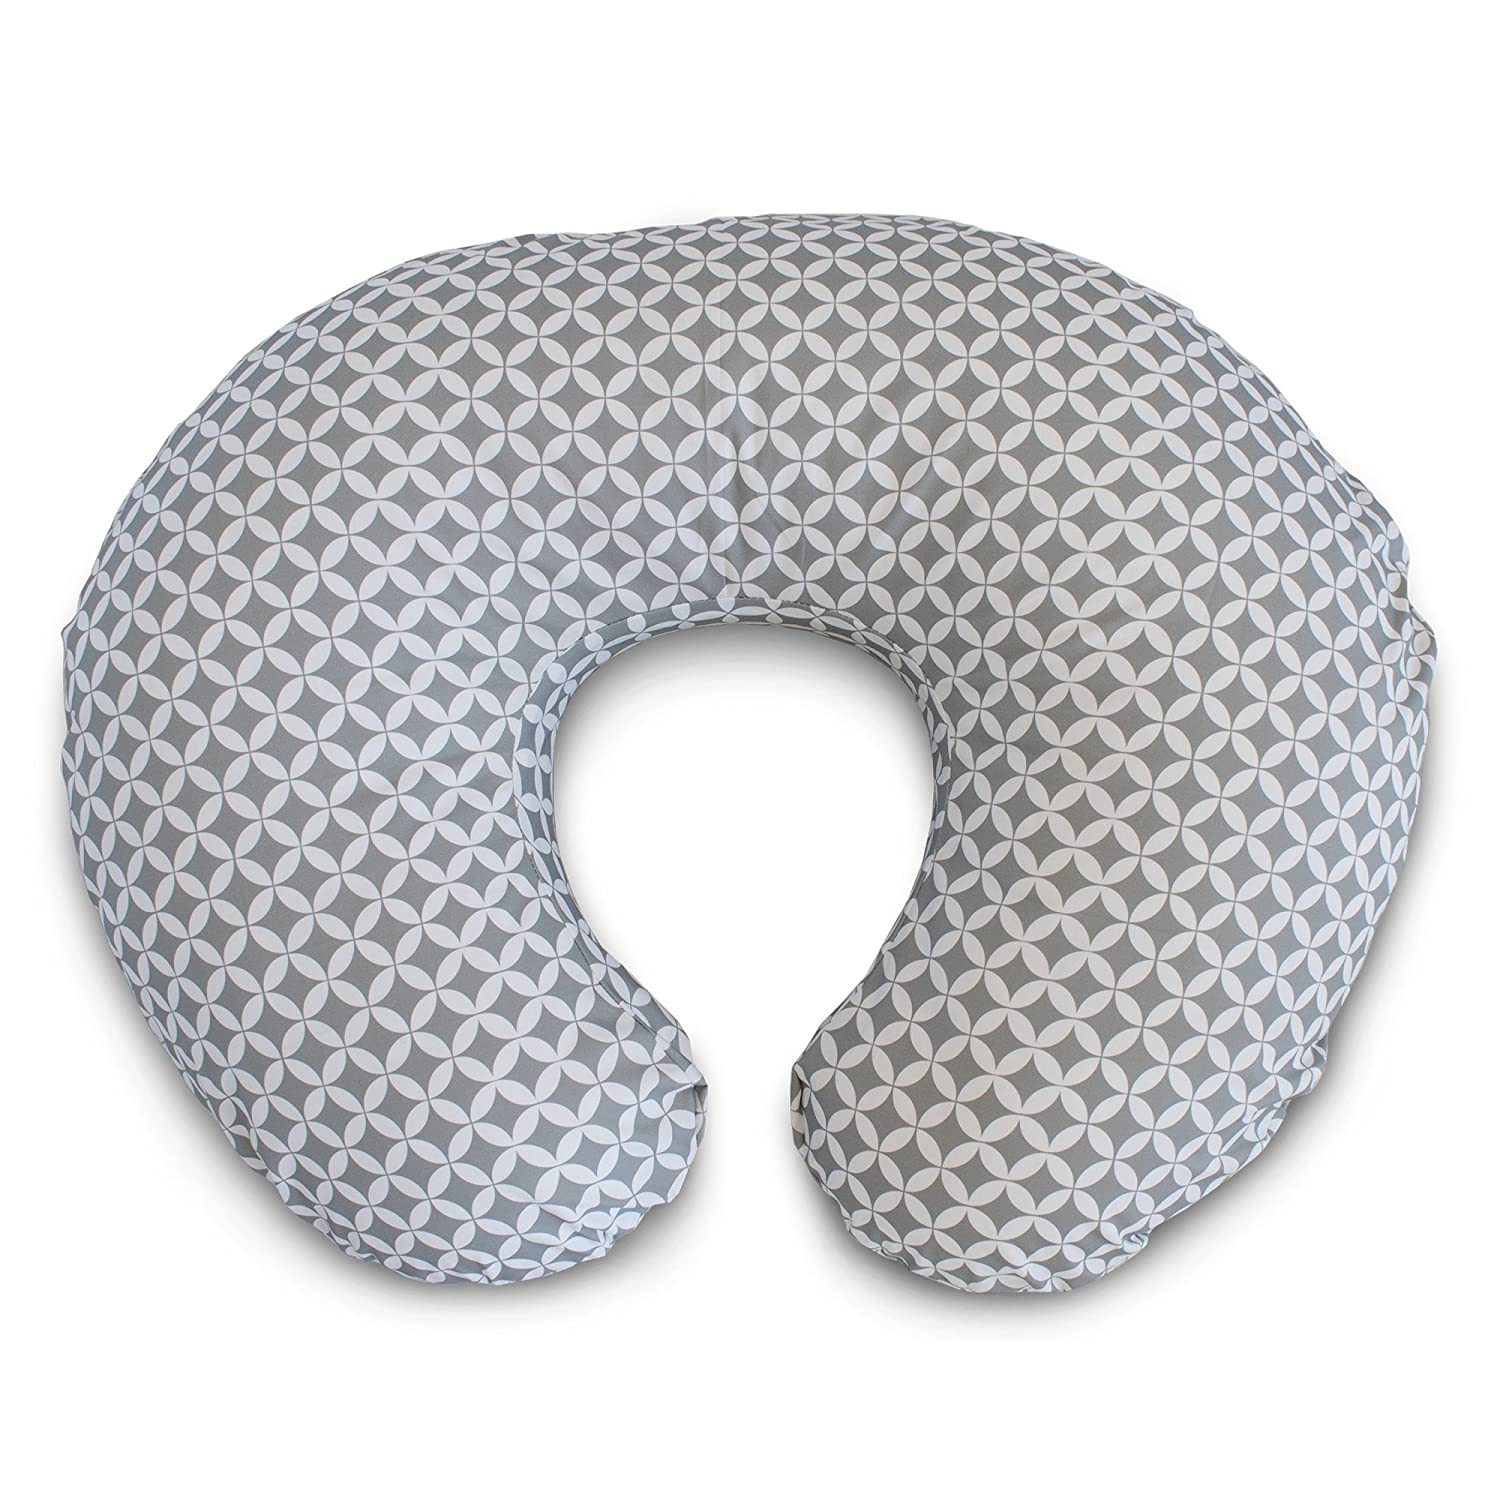 Boppy Original Nursing Pillow and Positioner, Geo Circles, Cotton Blend Fabric with allover fashion